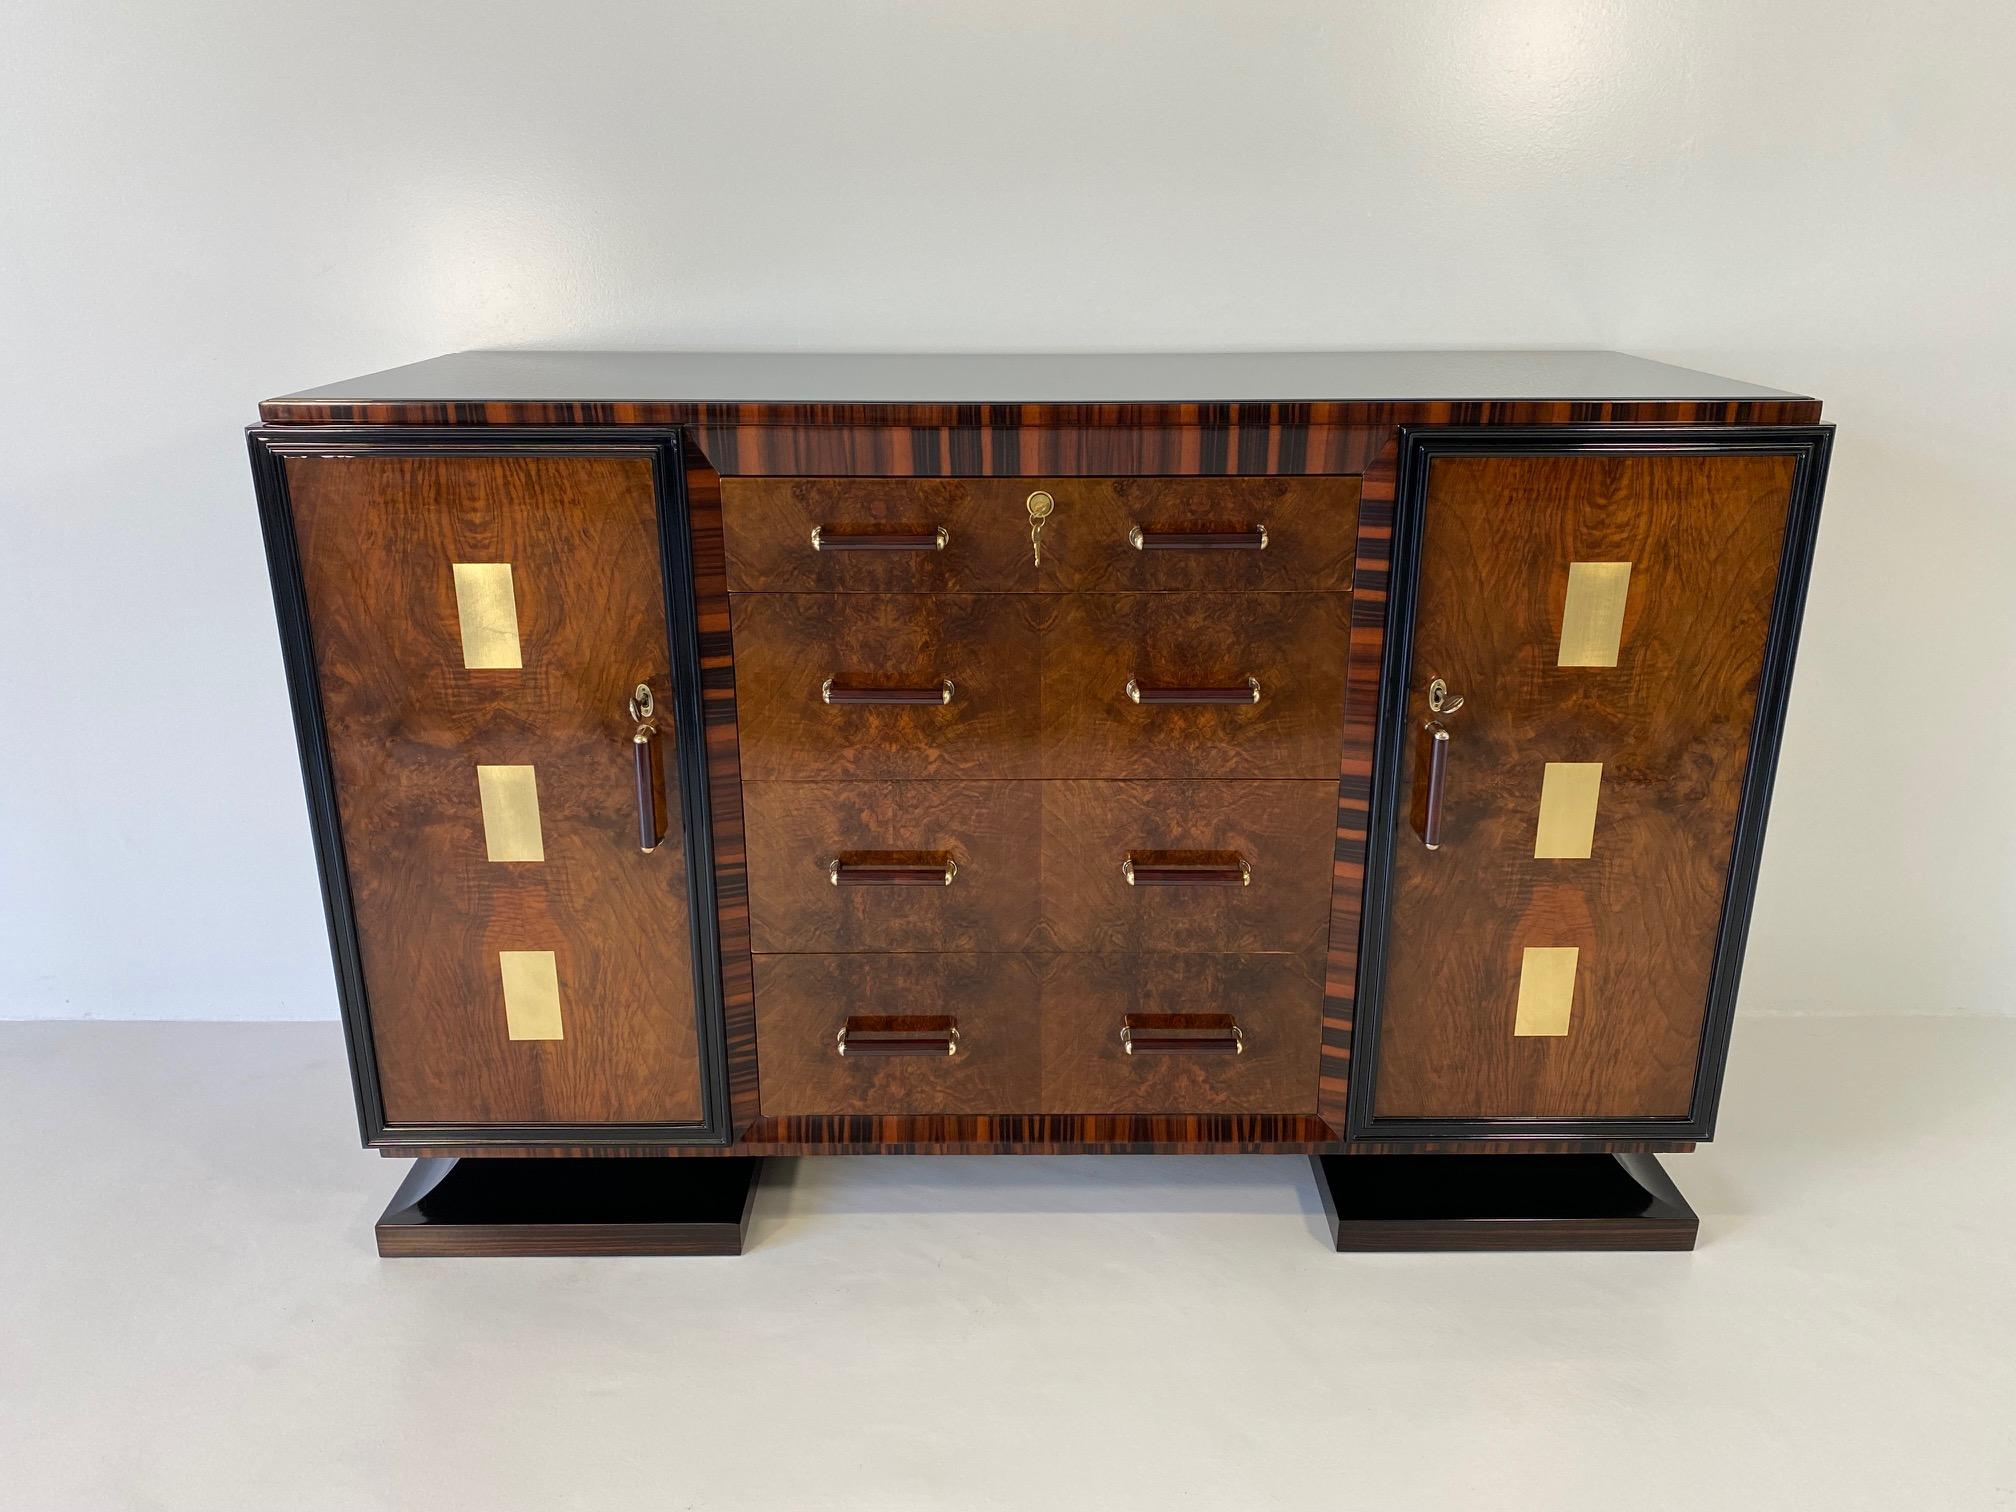 This Art Deco sideboard was produced in Italy in the 1940s. 
It features two different wood essences; walnut briar and Macassar, framed by black lacquered profiles. There are four drawers and two doors, on which there are gold leaf decorations.